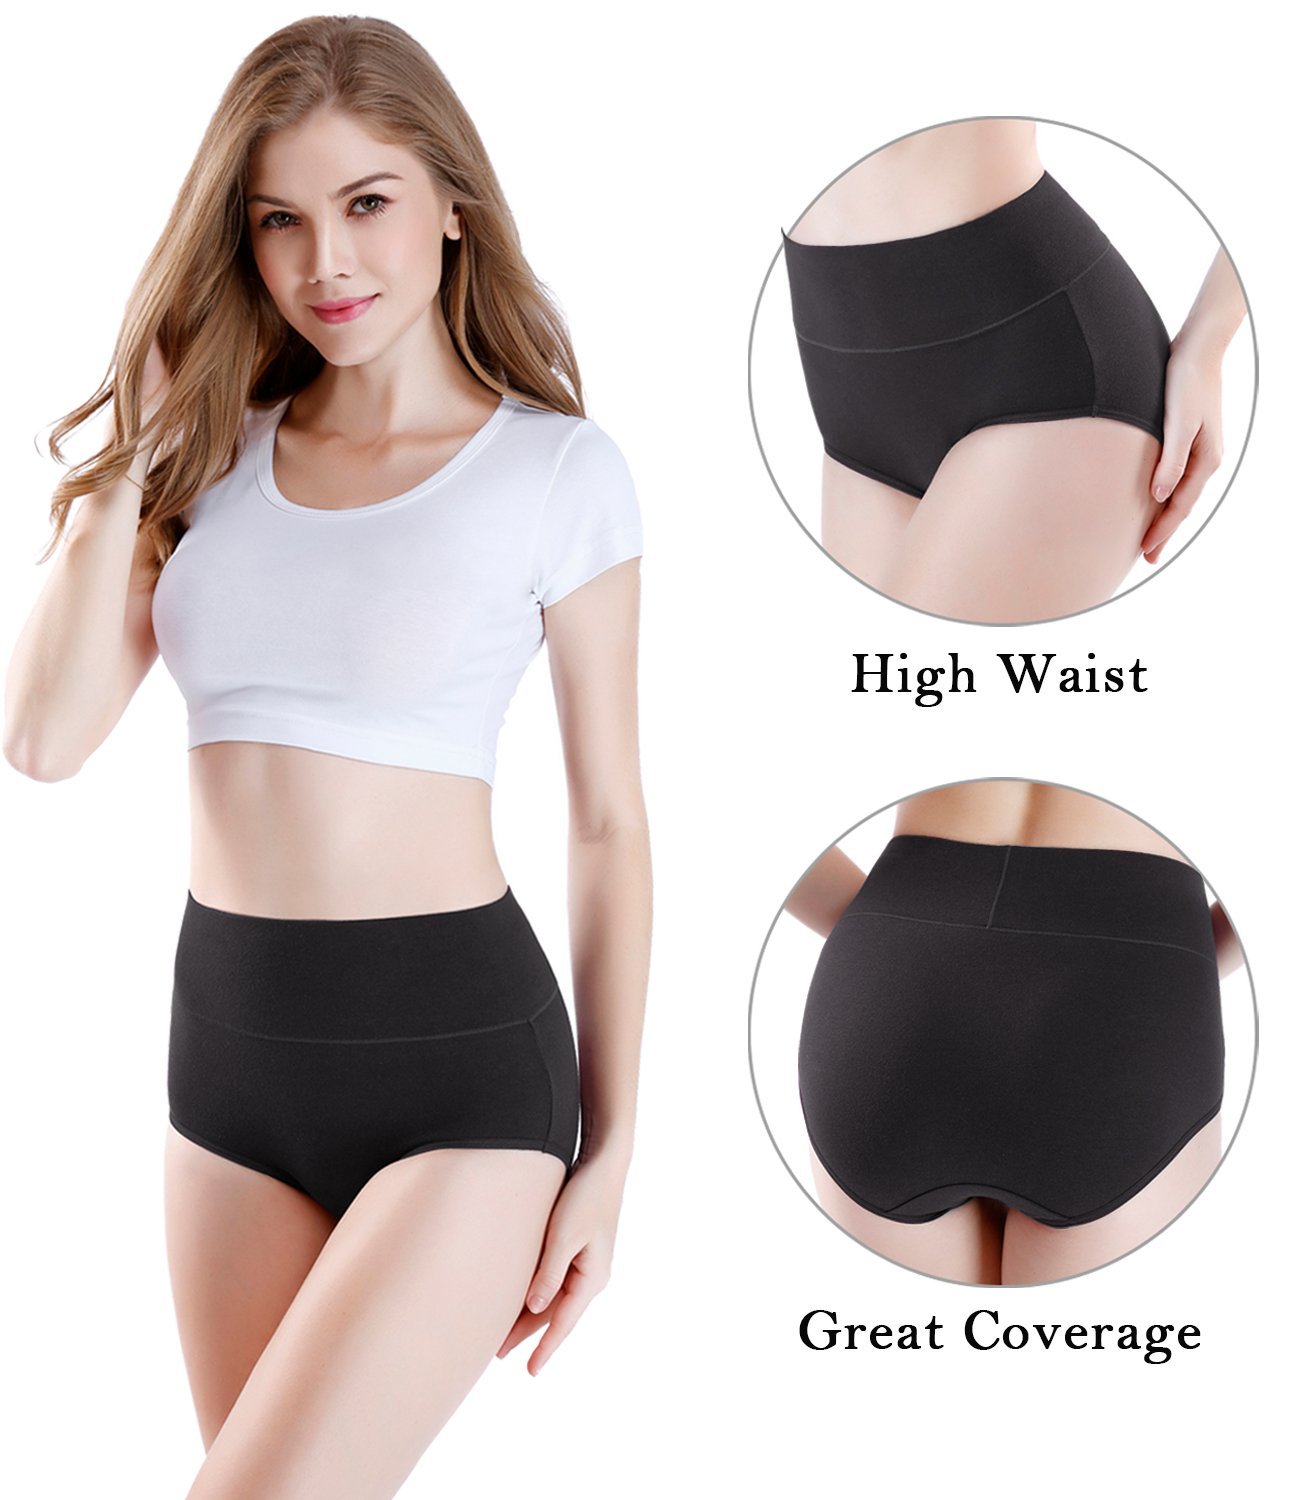 Buy Adira, Cotton Underwear For Women, High Waist panty with Full Coverage, Inside Elastic - No Elastic Exposure to Skin, Soft Cotton, Pack Of 6